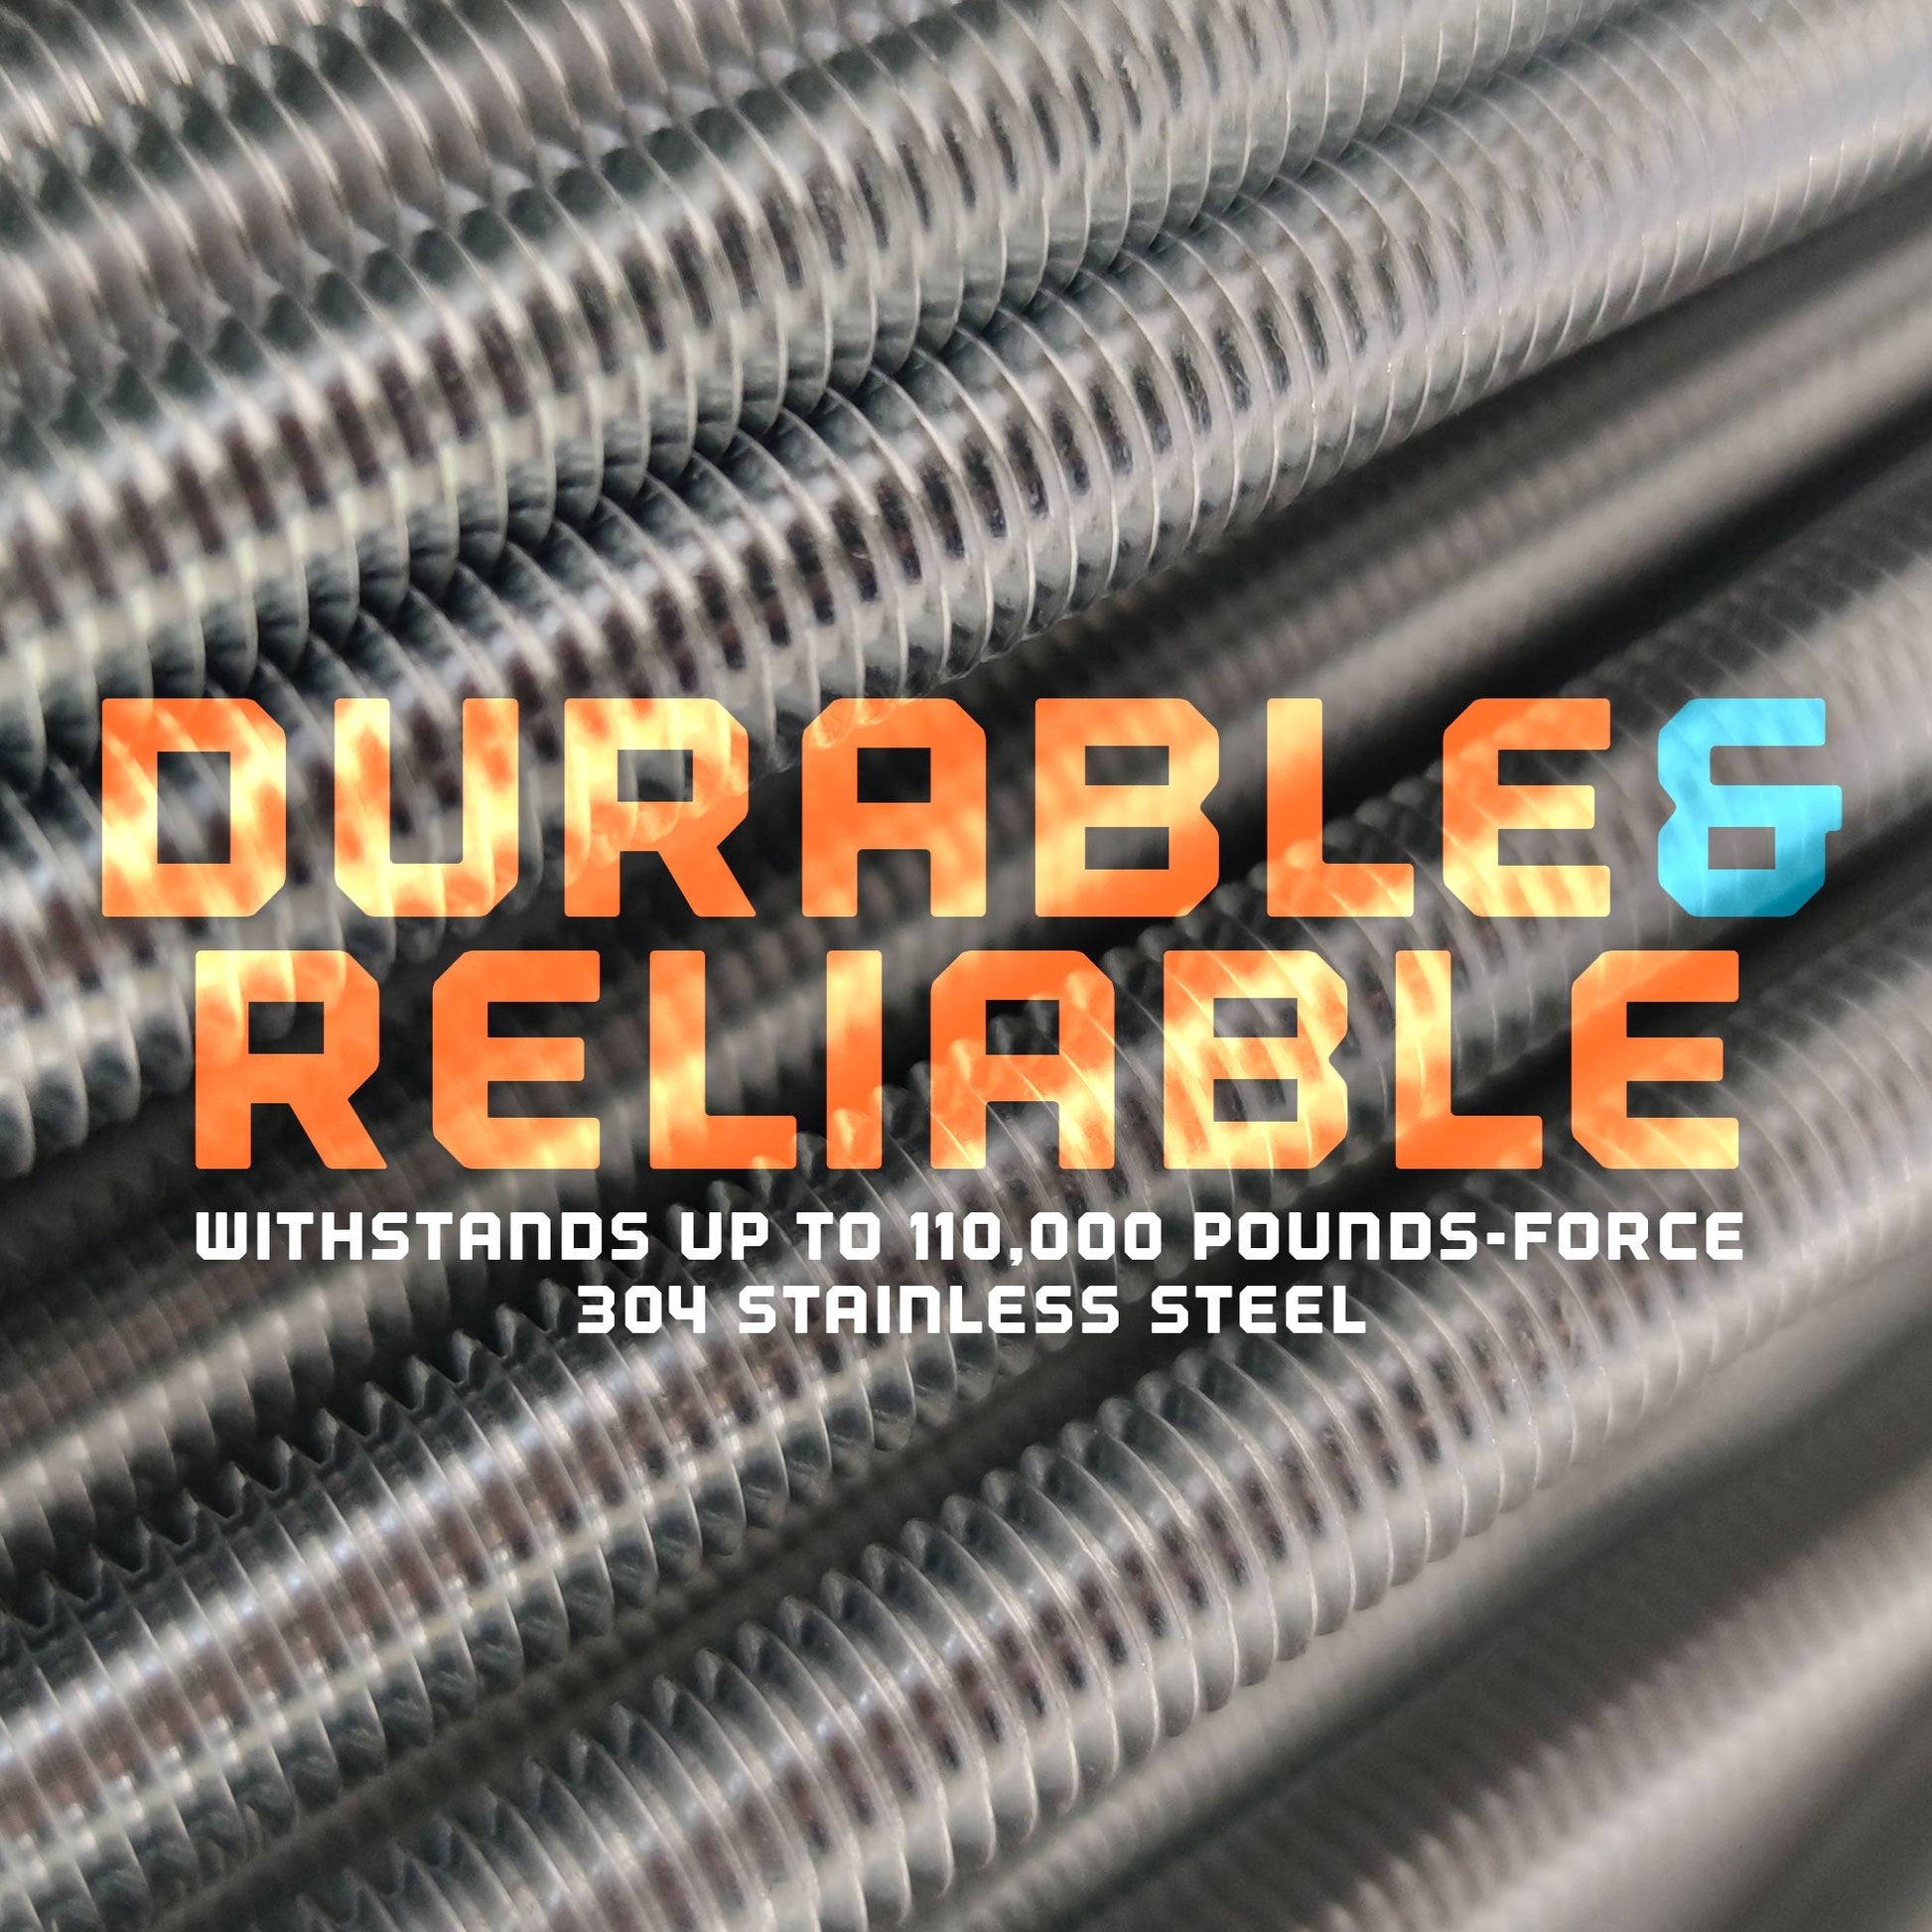 1"-8 x 2' 304 Stainless Steel Threaded Rod - Durable & Reliable